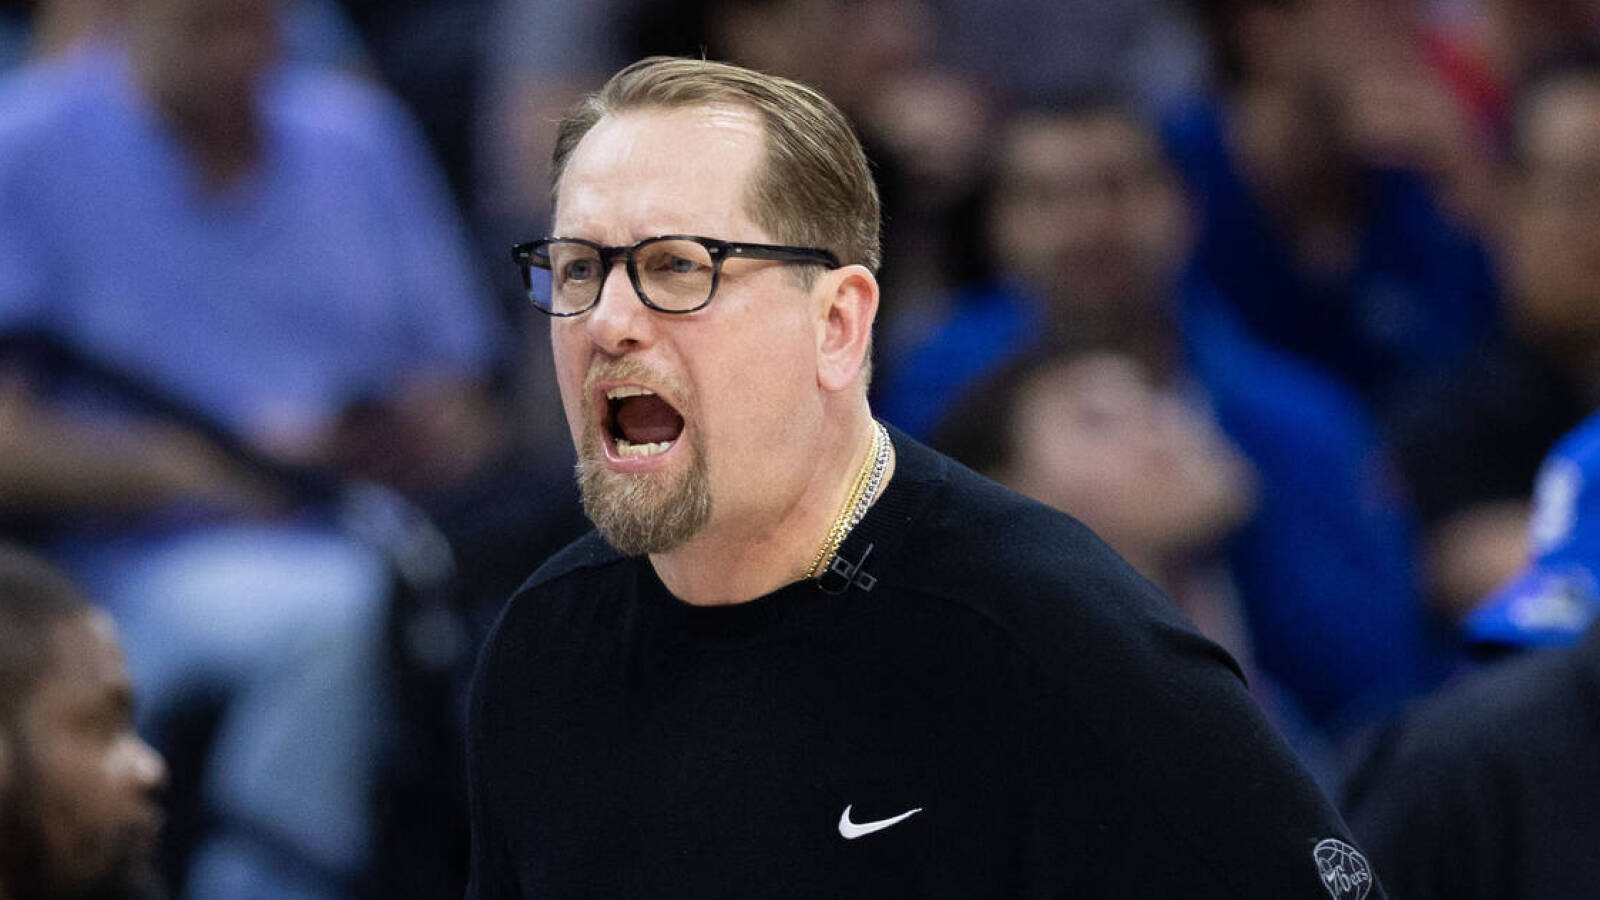 76ers coach Nick Nurse hurt himself in fit of frustration in Game 5